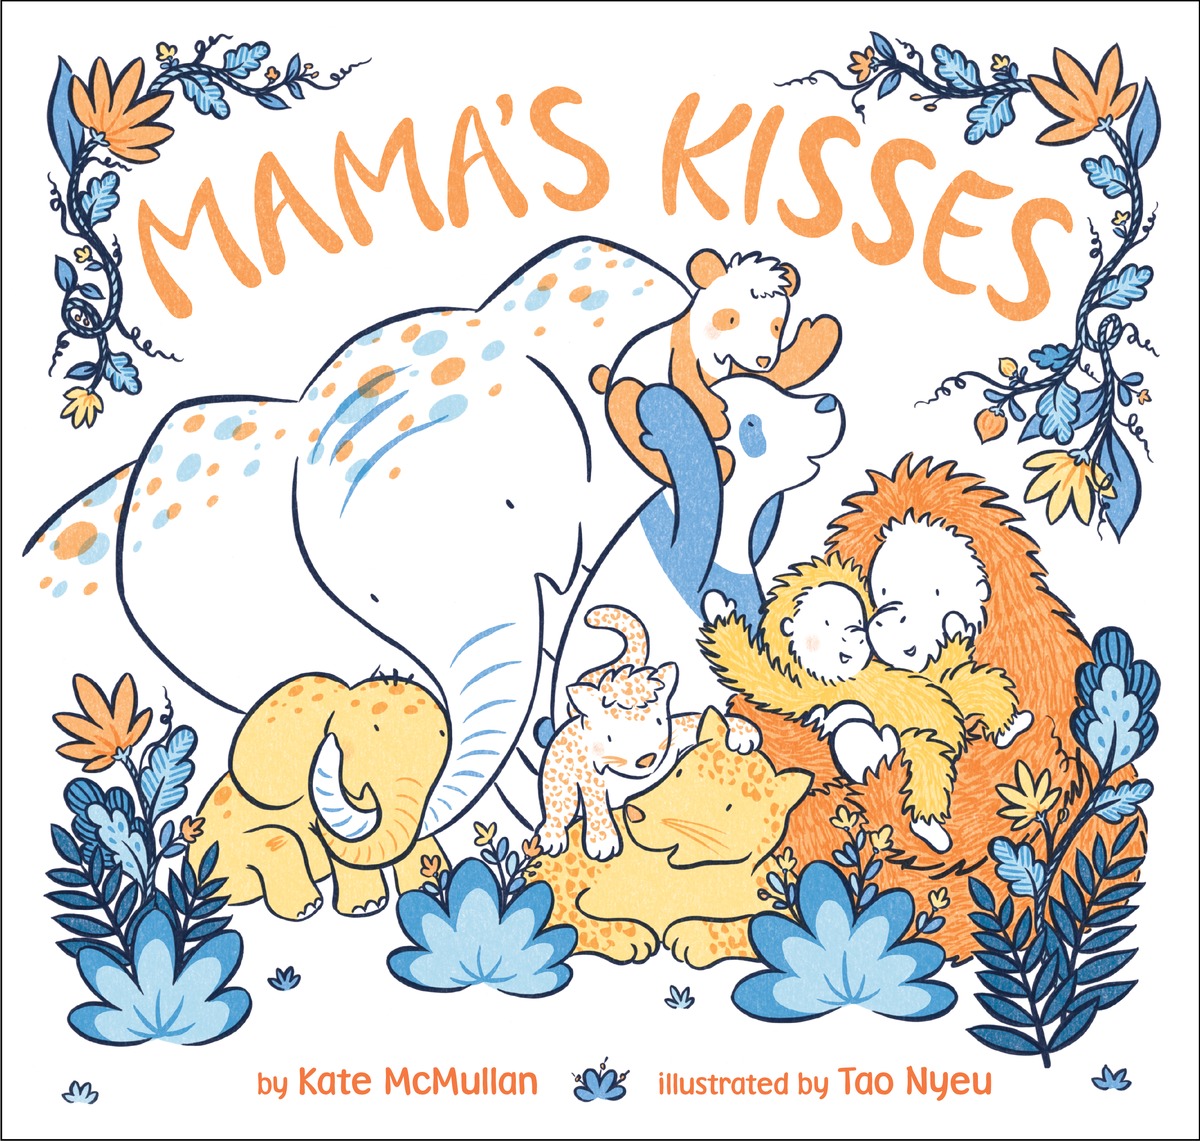 Sunday Story Time with Kate McMullan (Author of Mama's Kisses)